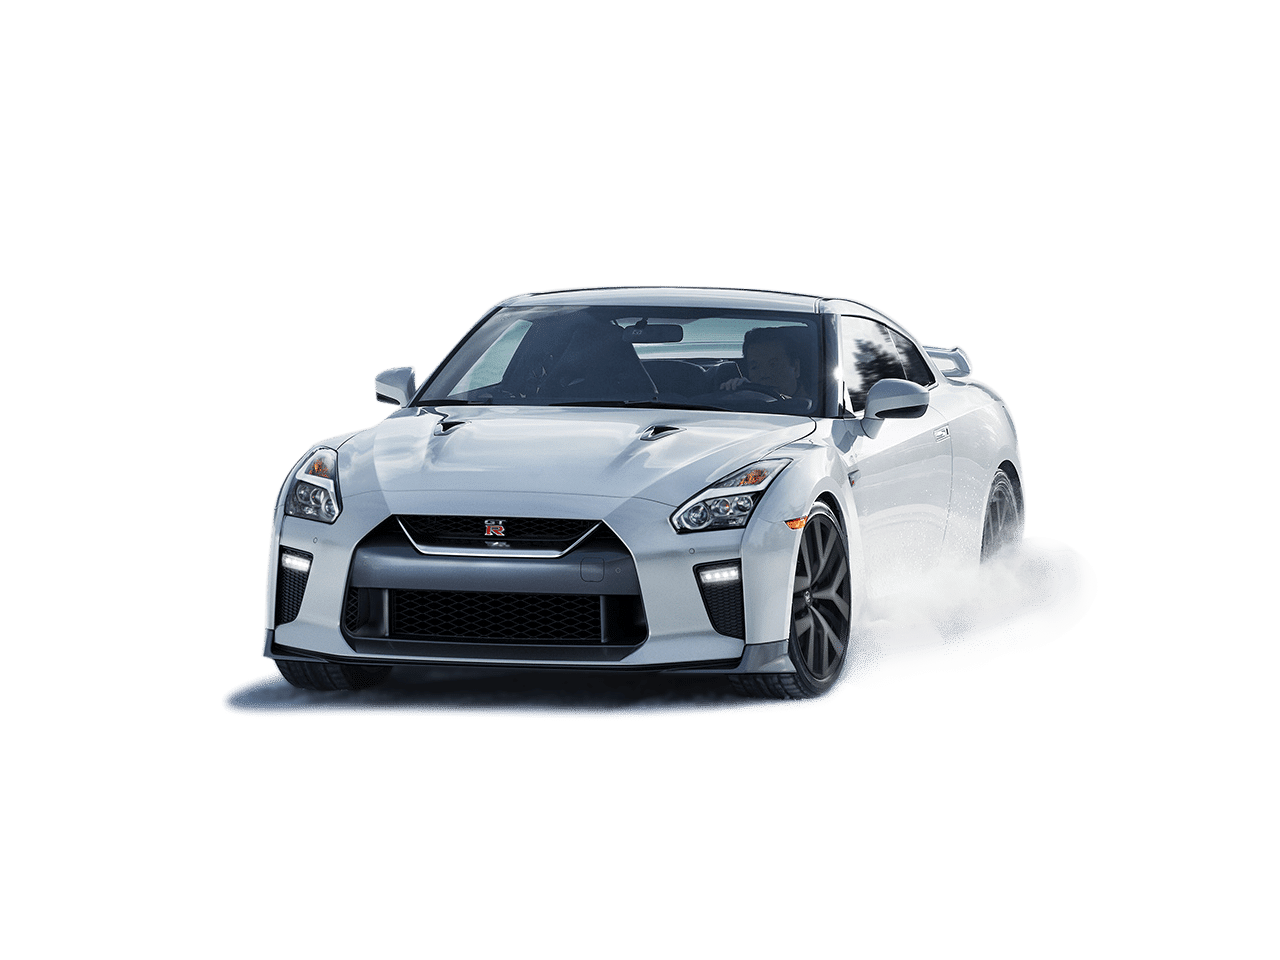 GT-R The Living Pride On The Road